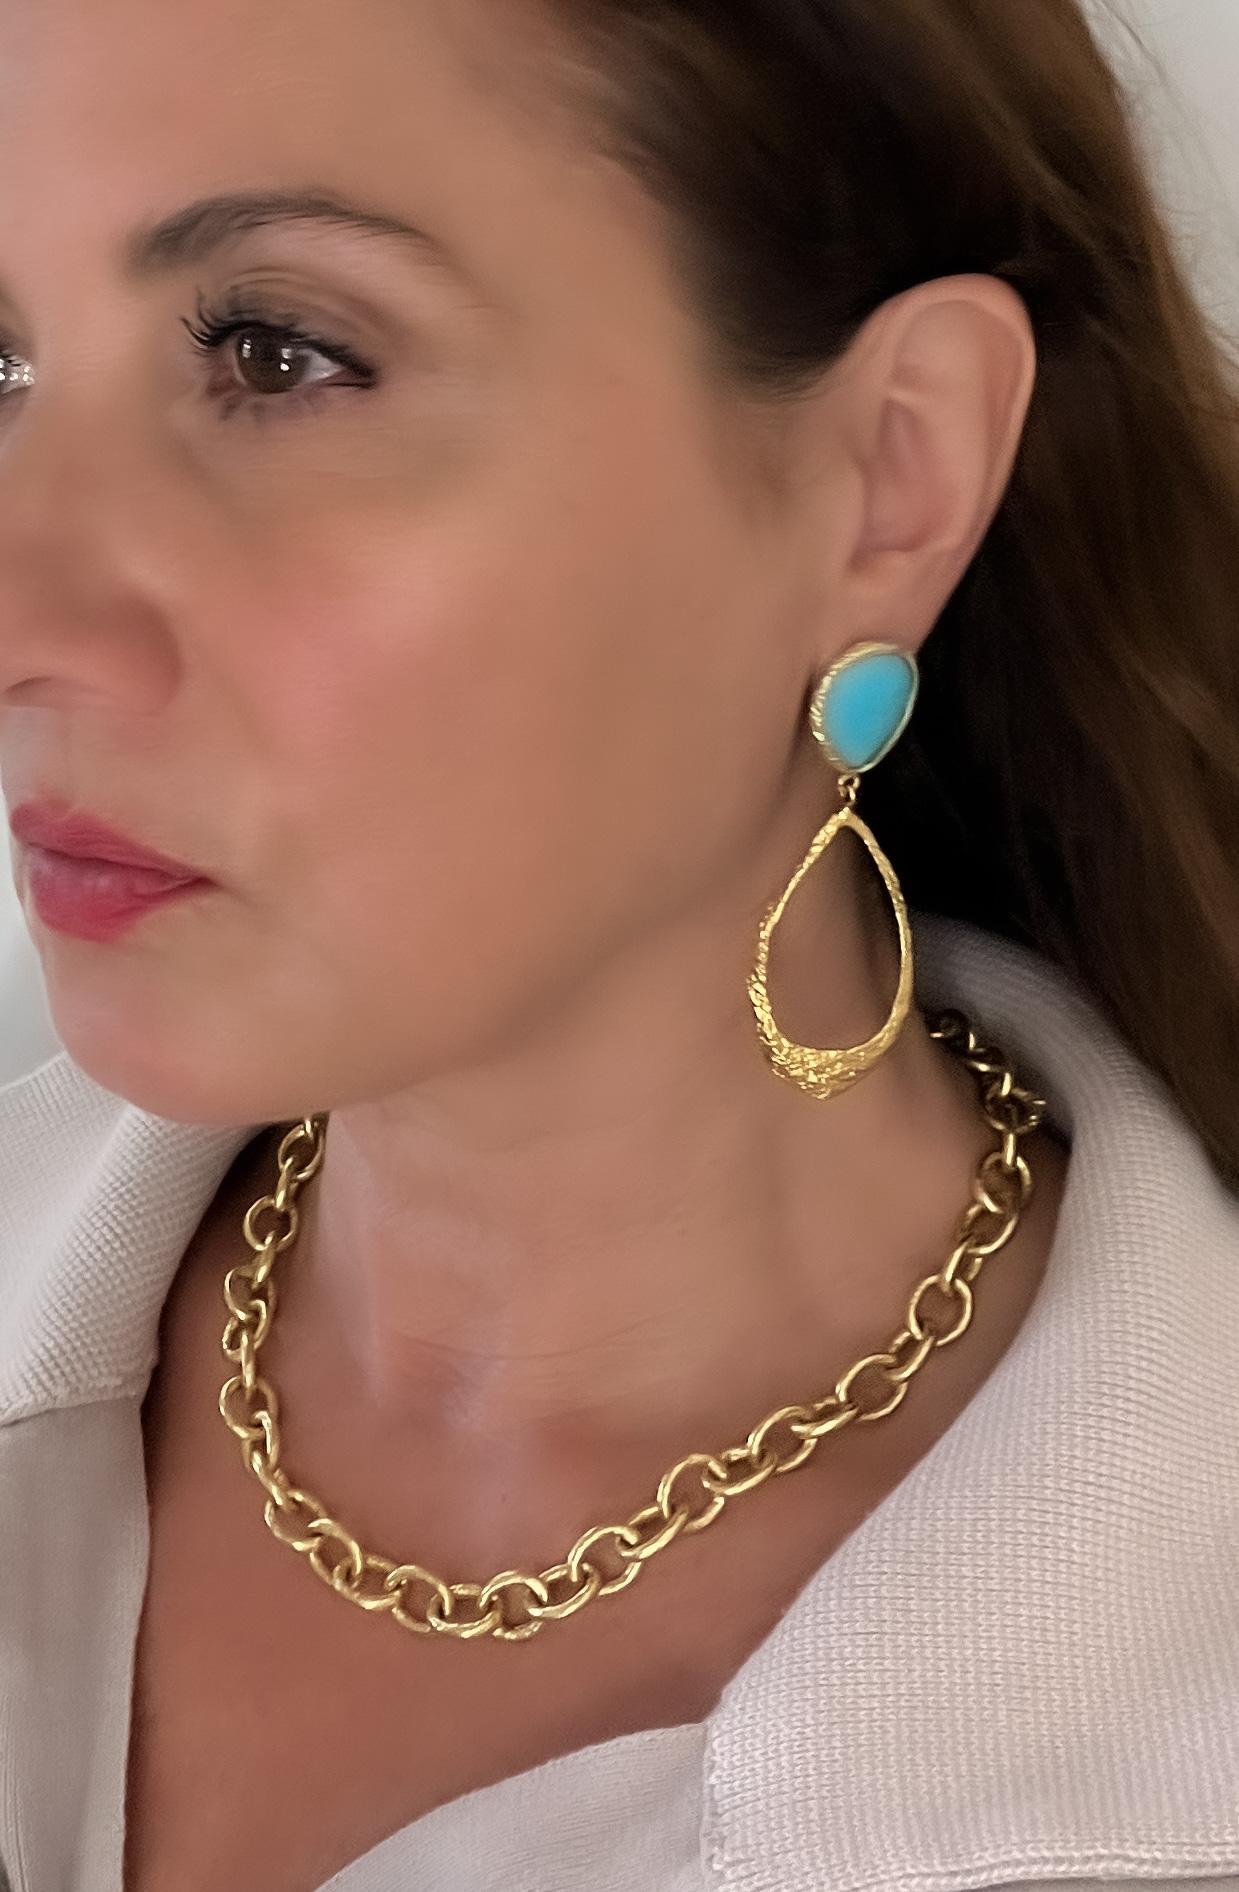 Signature Teardrop Earrings are the perfect combination of 22k gold organic texture and vibrant color of turquoise, effortlessly elevates your mood and style. Timeless, chic and spectacular.  Look out for other variations as well or customize your